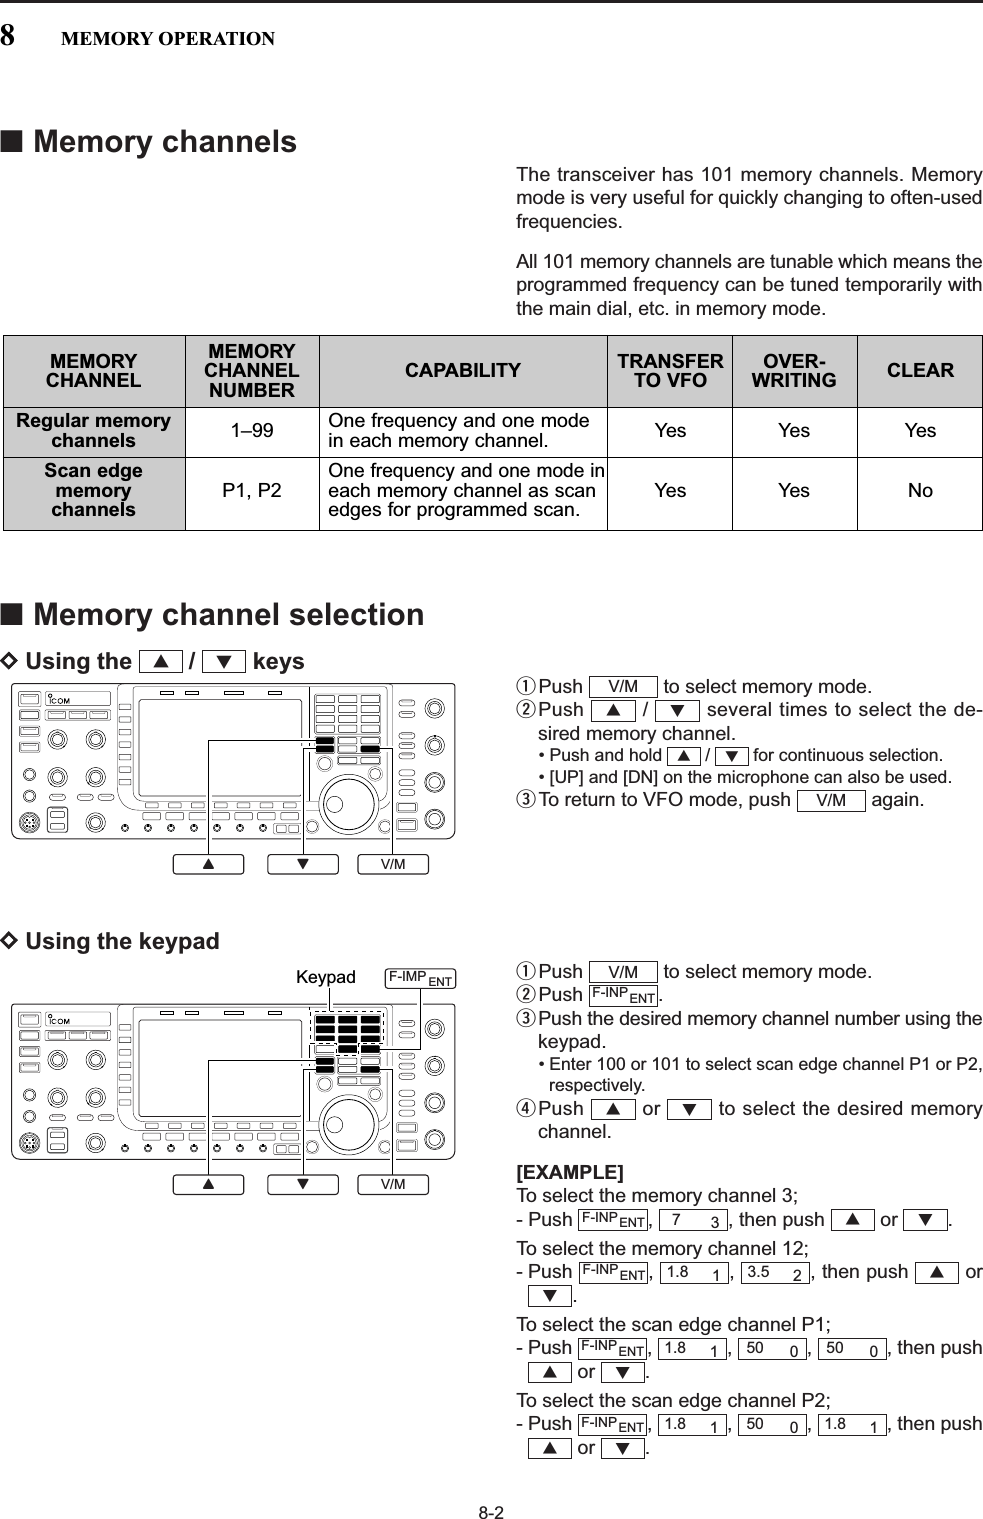 8-2■Memory channelsThe transceiver has 101 memory channels. Memorymode is very useful for quickly changing to often-usedfrequencies.All 101 memory channels are tunable which means theprogrammed frequency can be tuned temporarily withthe main dial, etc. in memory mode.■Memory channel selectionDUsing the  /  keysqPush  to select memory mode.wPush  /  several times to select the de-sired memory channel.• Push and hold  /  for continuous selection.• [UP] and [DN] on the microphone can also be used.eTo return to VFO mode, push  again.DUsing the keypadqPush  to select memory mode.wPush .ePush the desired memory channel number using thekeypad.• Enter 100 or 101 to select scan edge channel P1 or P2,respectively.rPush  or  to select the desired memorychannel.[EXAMPLE]To select the memory channel 3;- Push  ,  , then push  or  .To select the memory channel 12;- Push , , , then push or.To select the scan edge channel P1;- Push , , , , then pushor .To select the scan edge channel P2;- Push , , , , then pushor .√∫1.8 150 01.8 1F-INPENT√∫50 050 01.8 1F-INPENT√∫3.5 21.8 1F-INPENT√∫73F-INPENT√∫F-INPENTV/MV/M√∫√∫V/M√∫V/MY ZKeypad F-IMP ENTV/MY Z8MEMORY OPERATIONMEMORY MEMORY TRANSFER OVER-CHANNEL CHANNEL CAPABILITY TO VFO WRITING CLEARNUMBERRegular memory 1–99 One frequency and one mode  Yes Yes Yeschannels in each memory channel.Scan edgeOne frequency and one mode inmemory P1, P2 each memory channel as scan Yes Yes Nochannels edges for programmed scan.